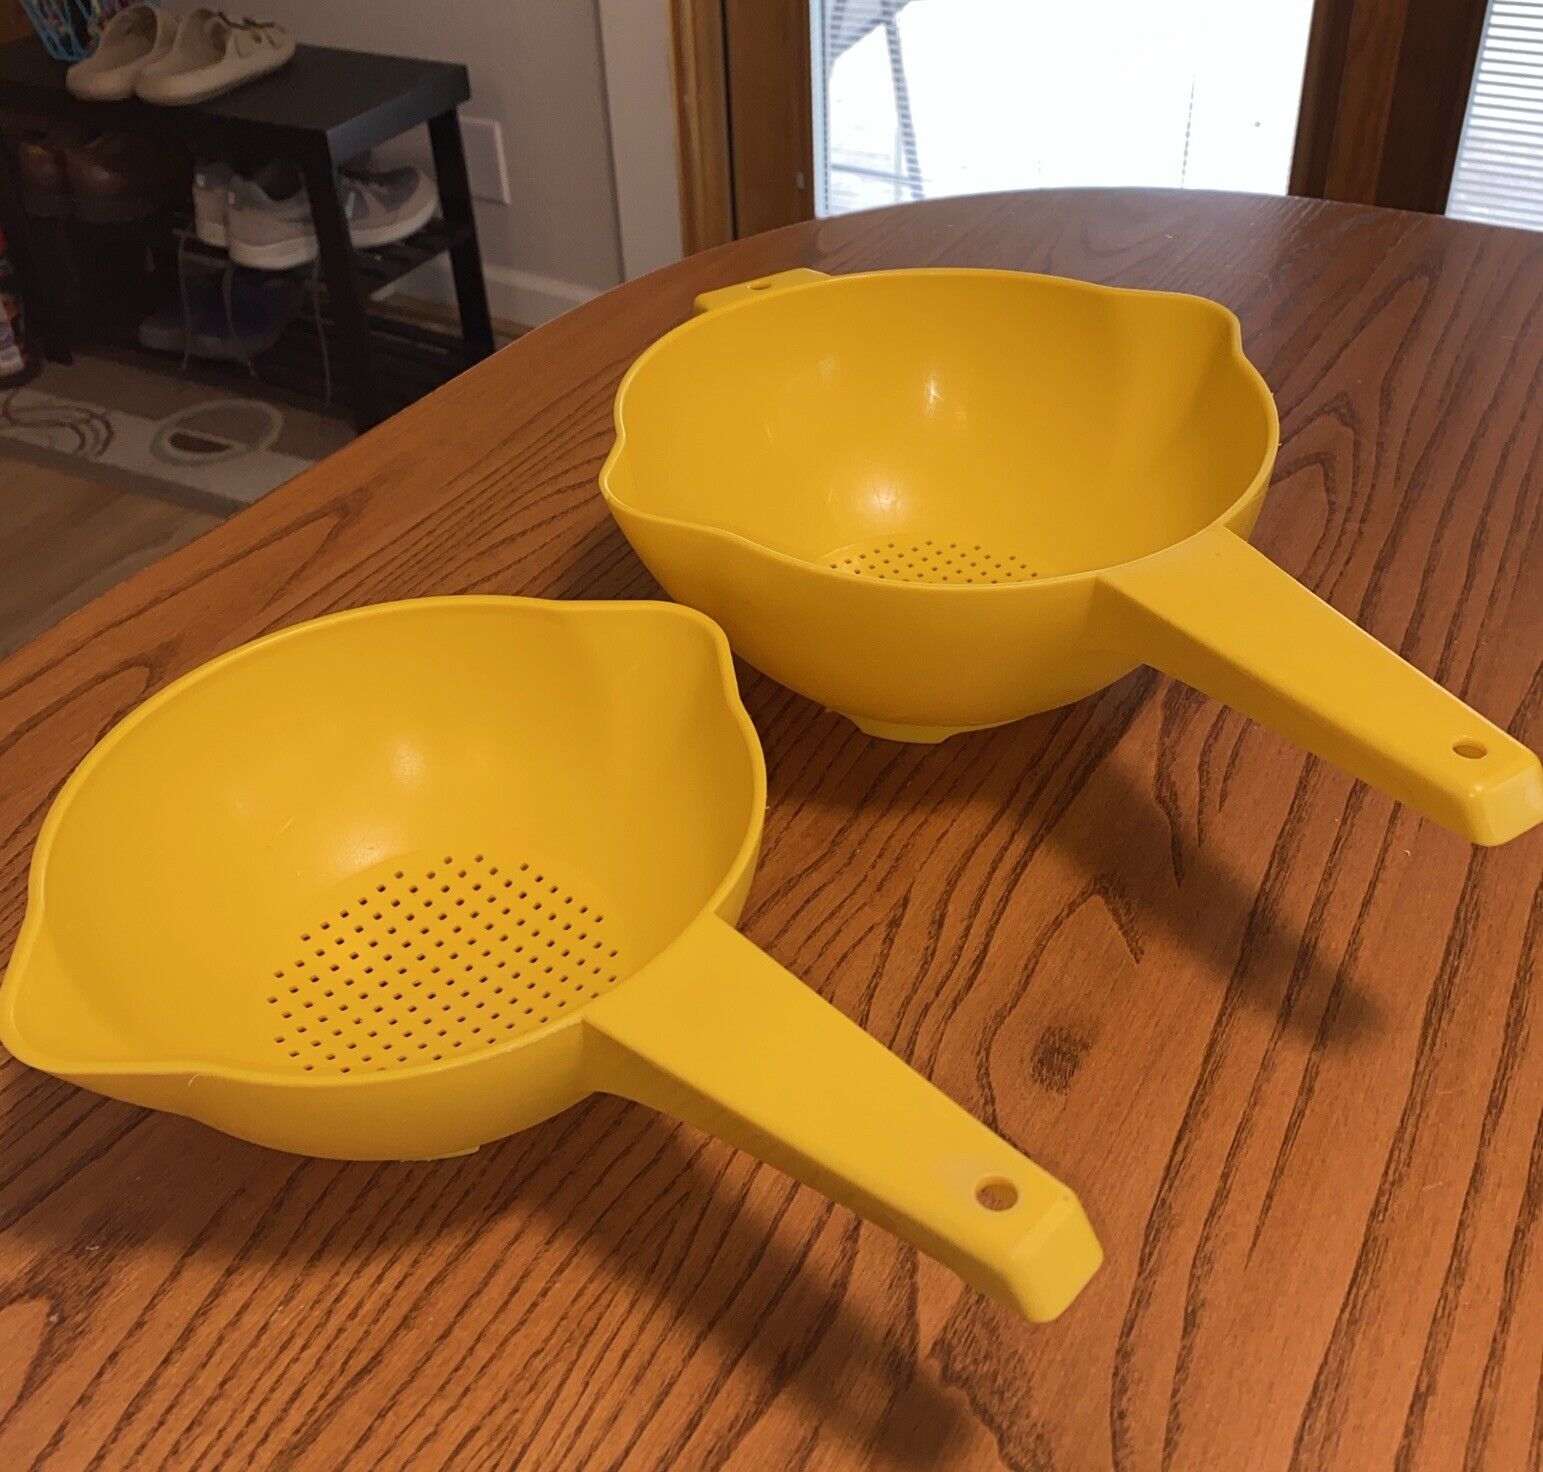 Lot of 2 Vintage Yellow Tupperware Strainer Colanders #1200 & #1523 - 1 & 2 Qt.